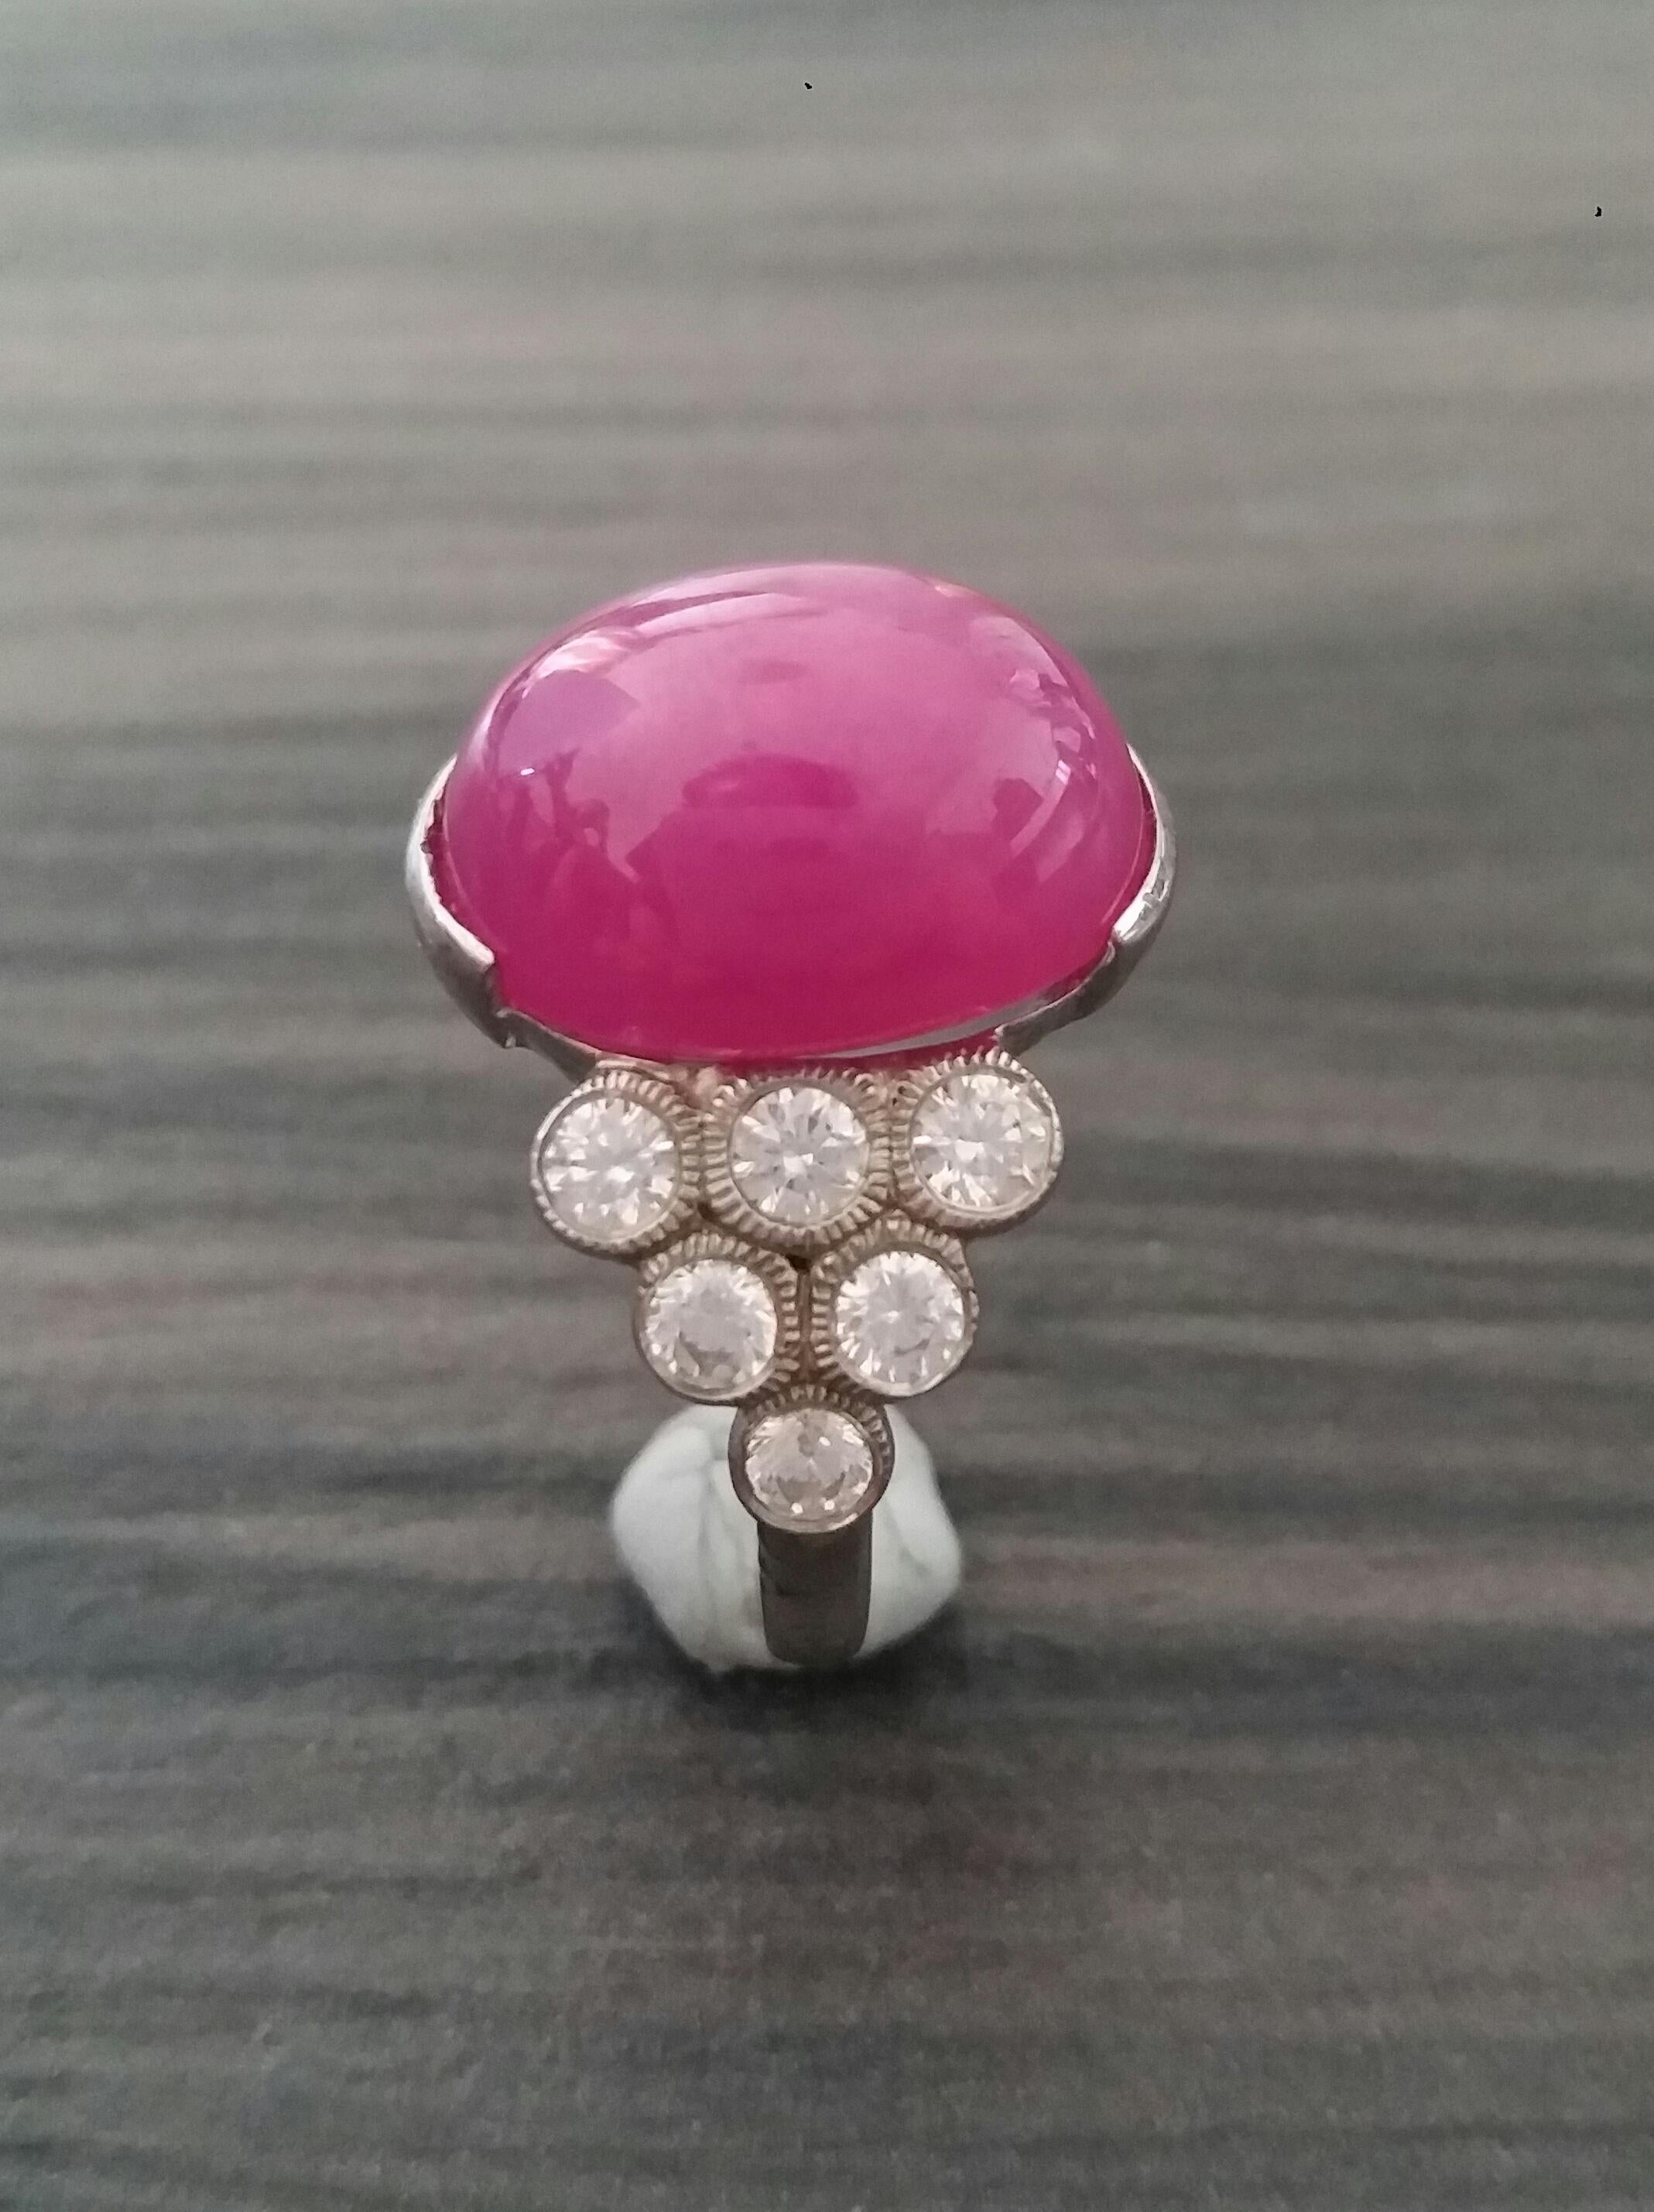 13 Carats Ruby Oval Cabochon 14kt Gold 12 Full Cut Round Diamonds Cocktail Ring For Sale 1